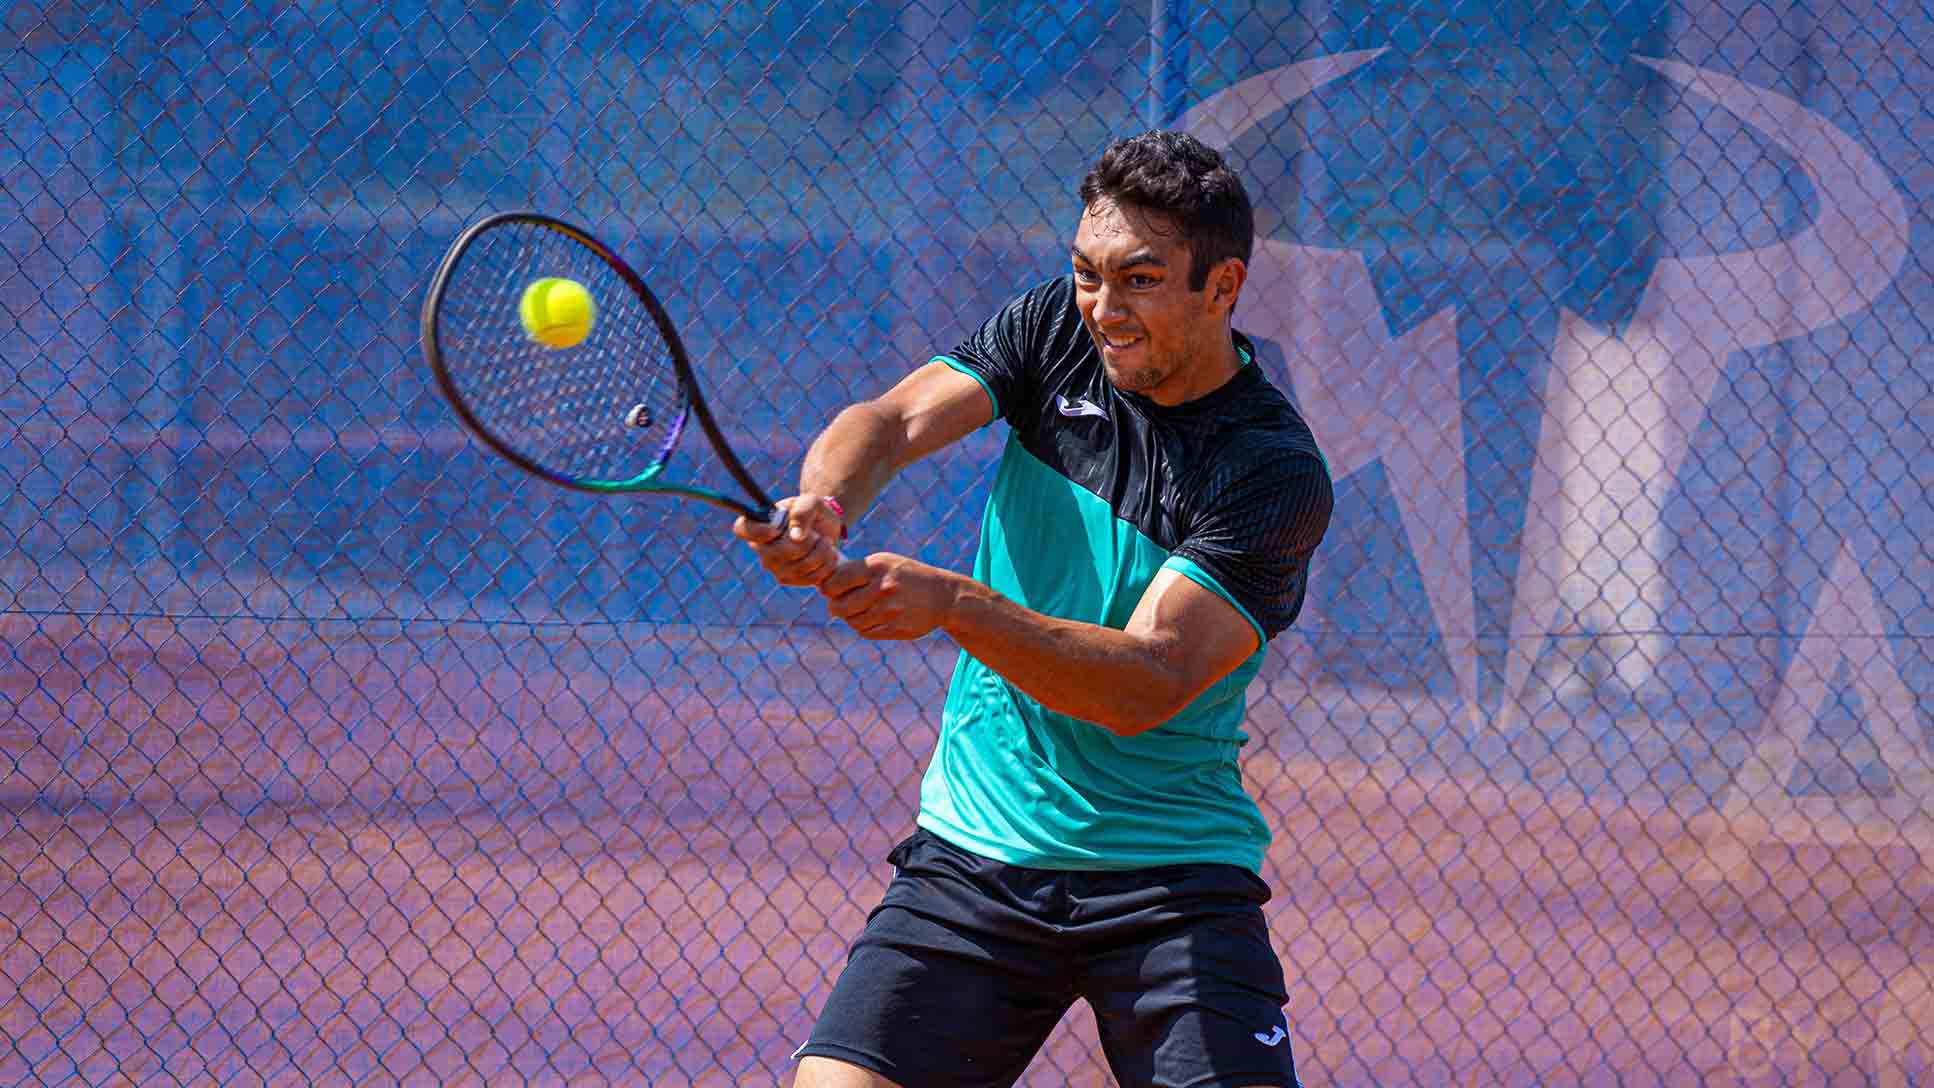 Daniel Rincón claims his first ITF title in Hollan